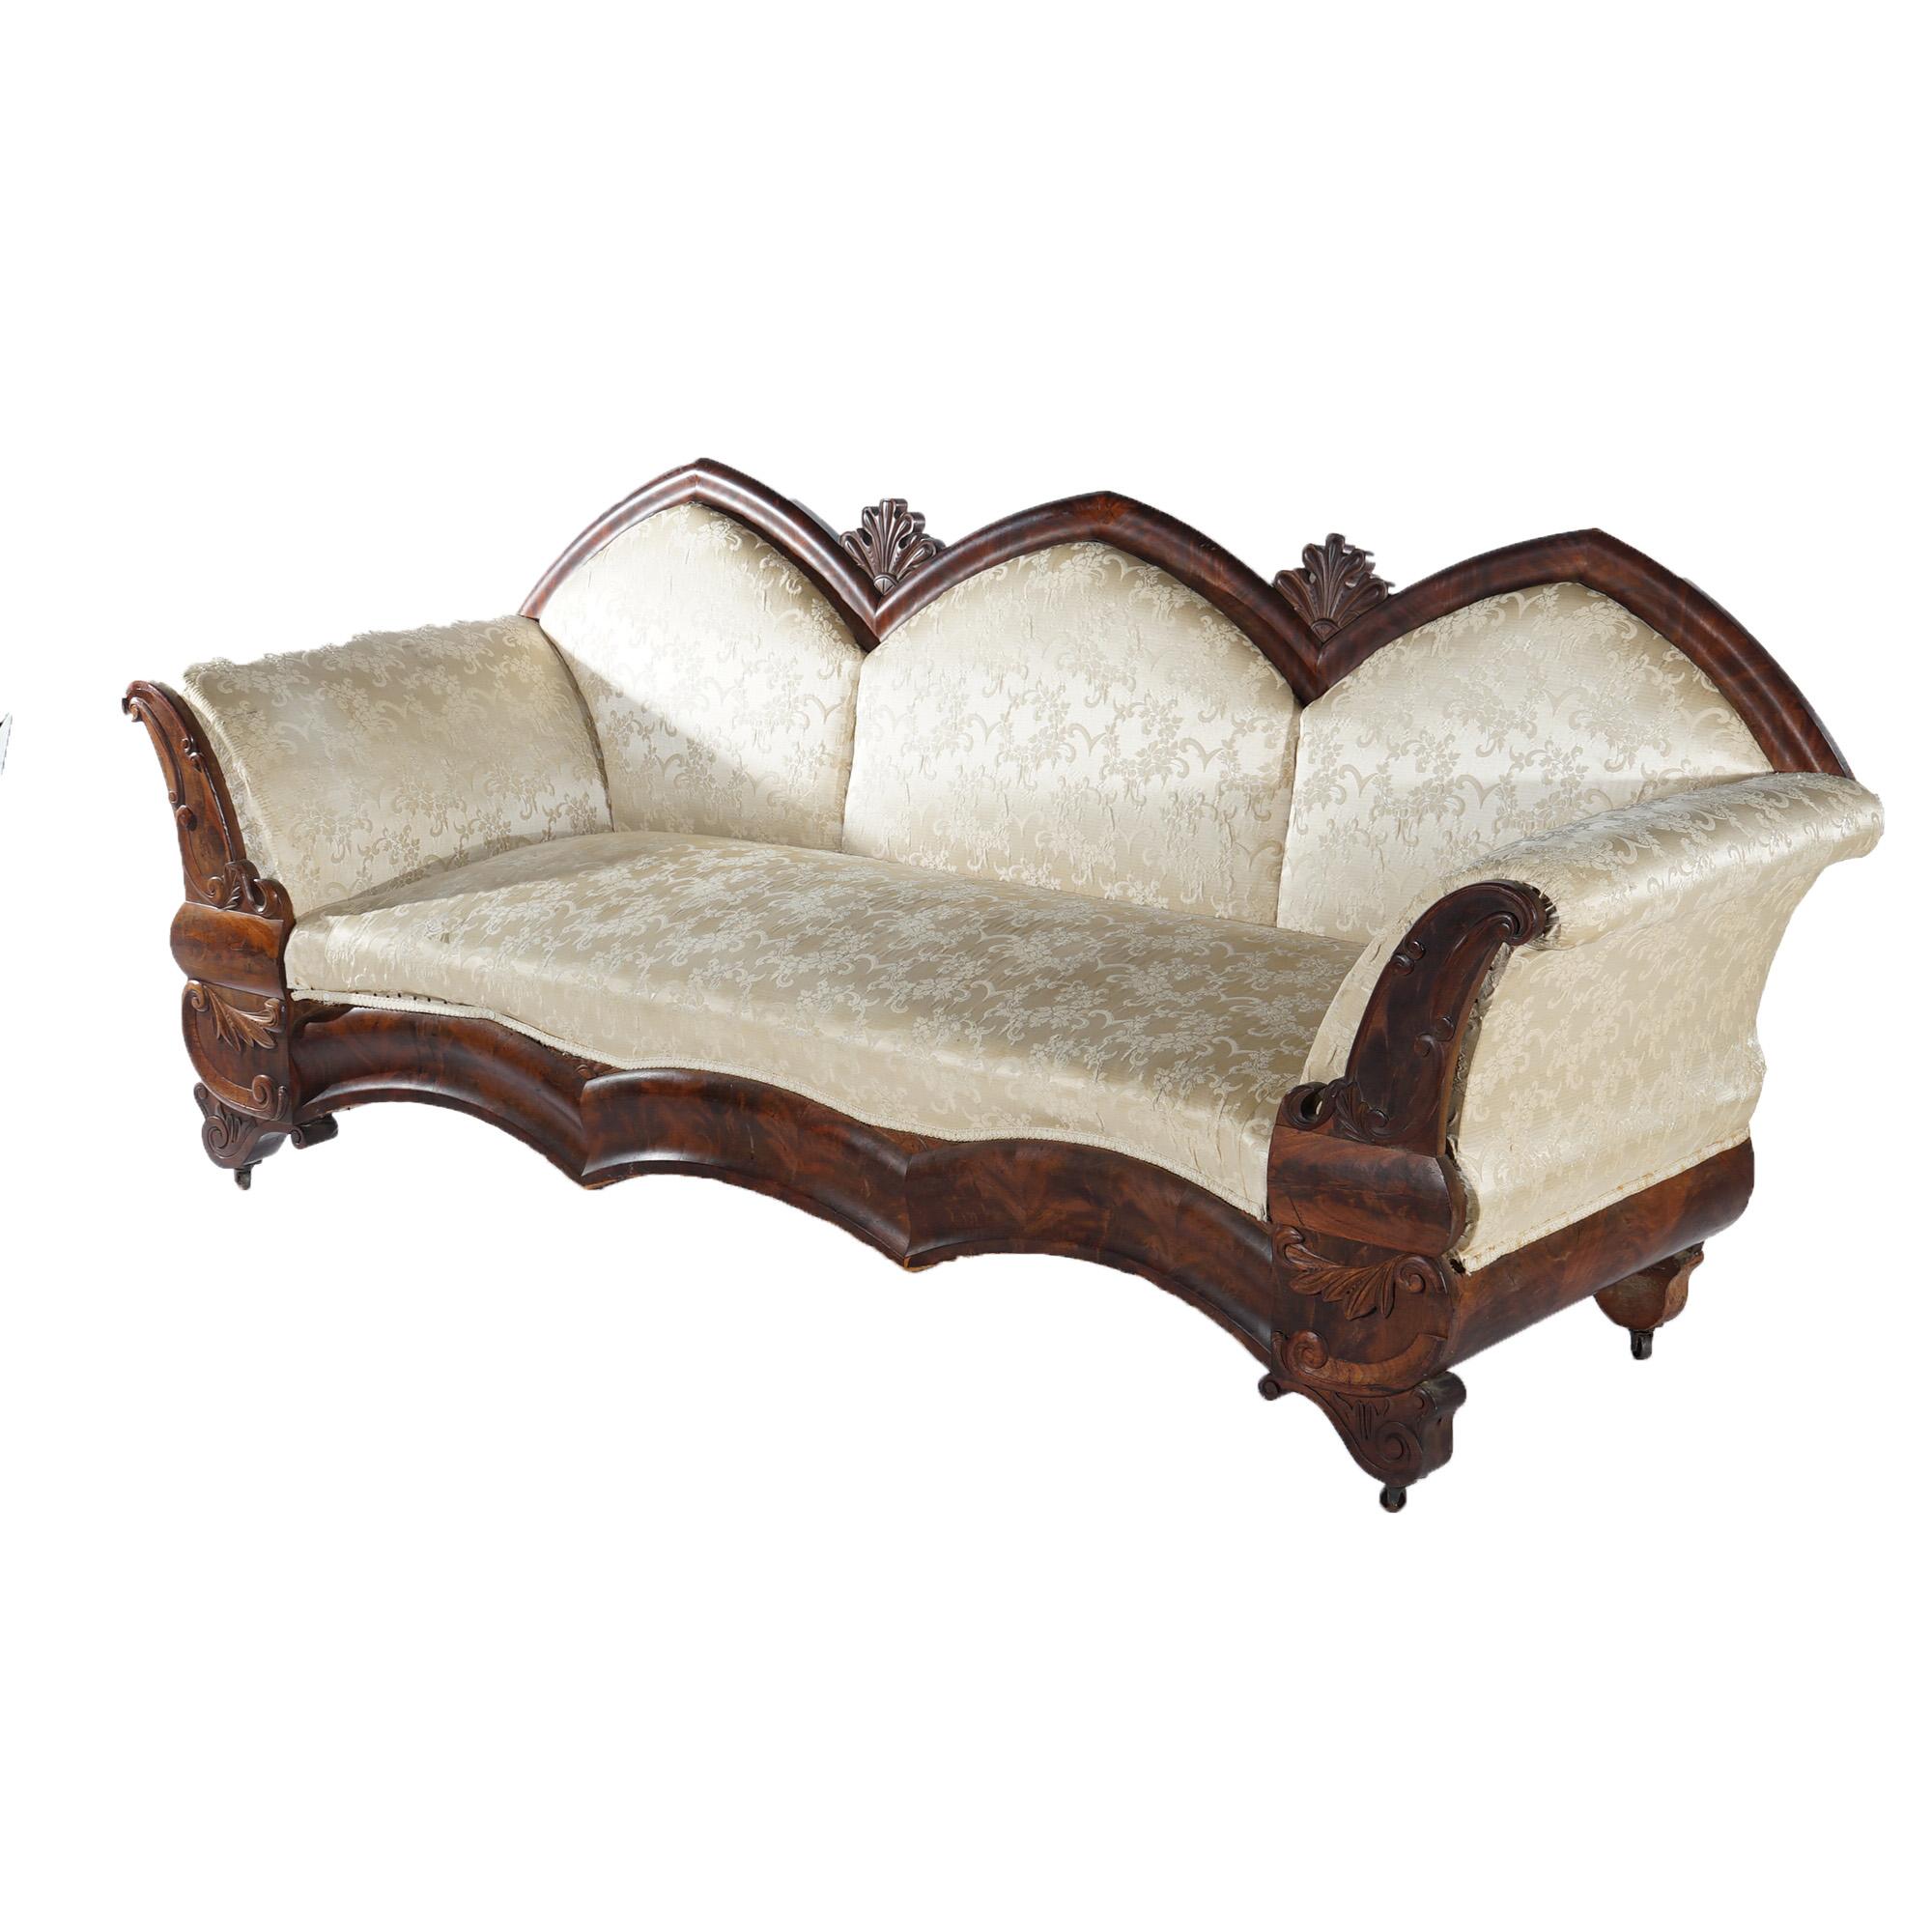 An antique Gothic Revival Classical sofa offers flame mahogany frame with triple cathedral form back, scroll form arms, carved foliate elements and raised on stylized scroll form feet; upholstered; c1850

Measures - 37